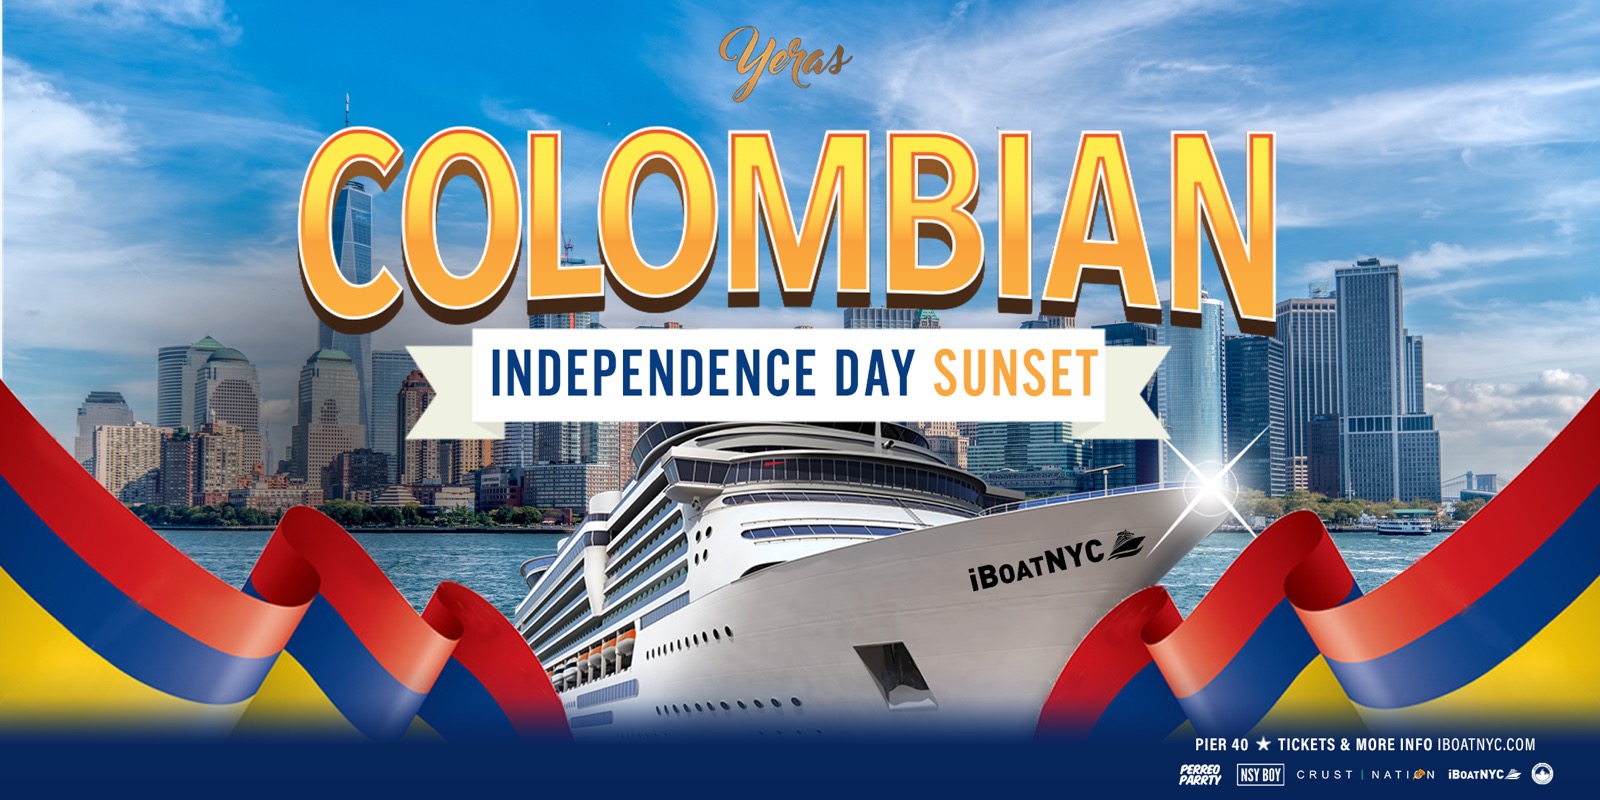 Colombian Independence Day Sunset Party Cruise